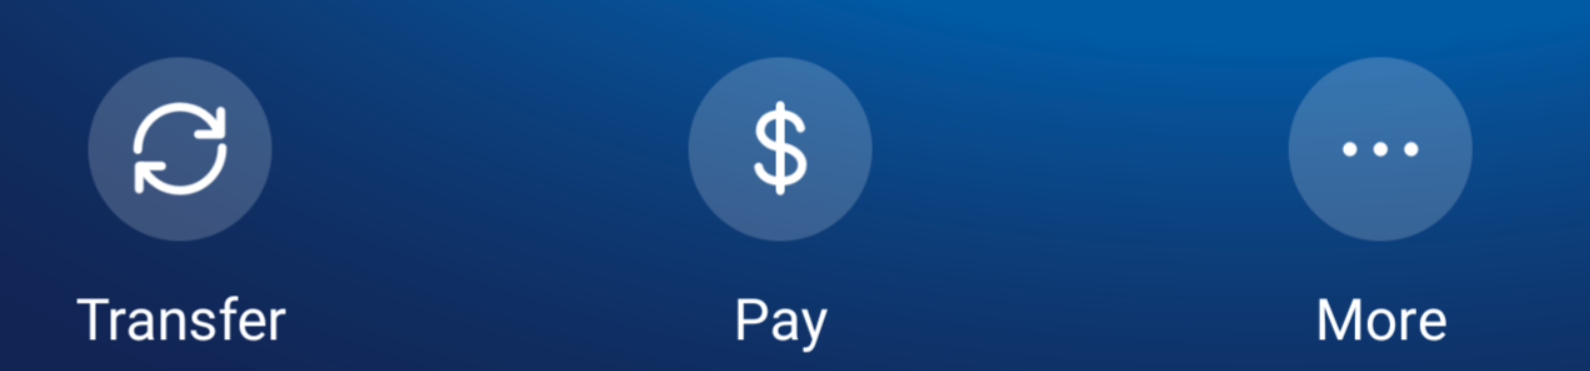 ANZ_MBA_Pay.png